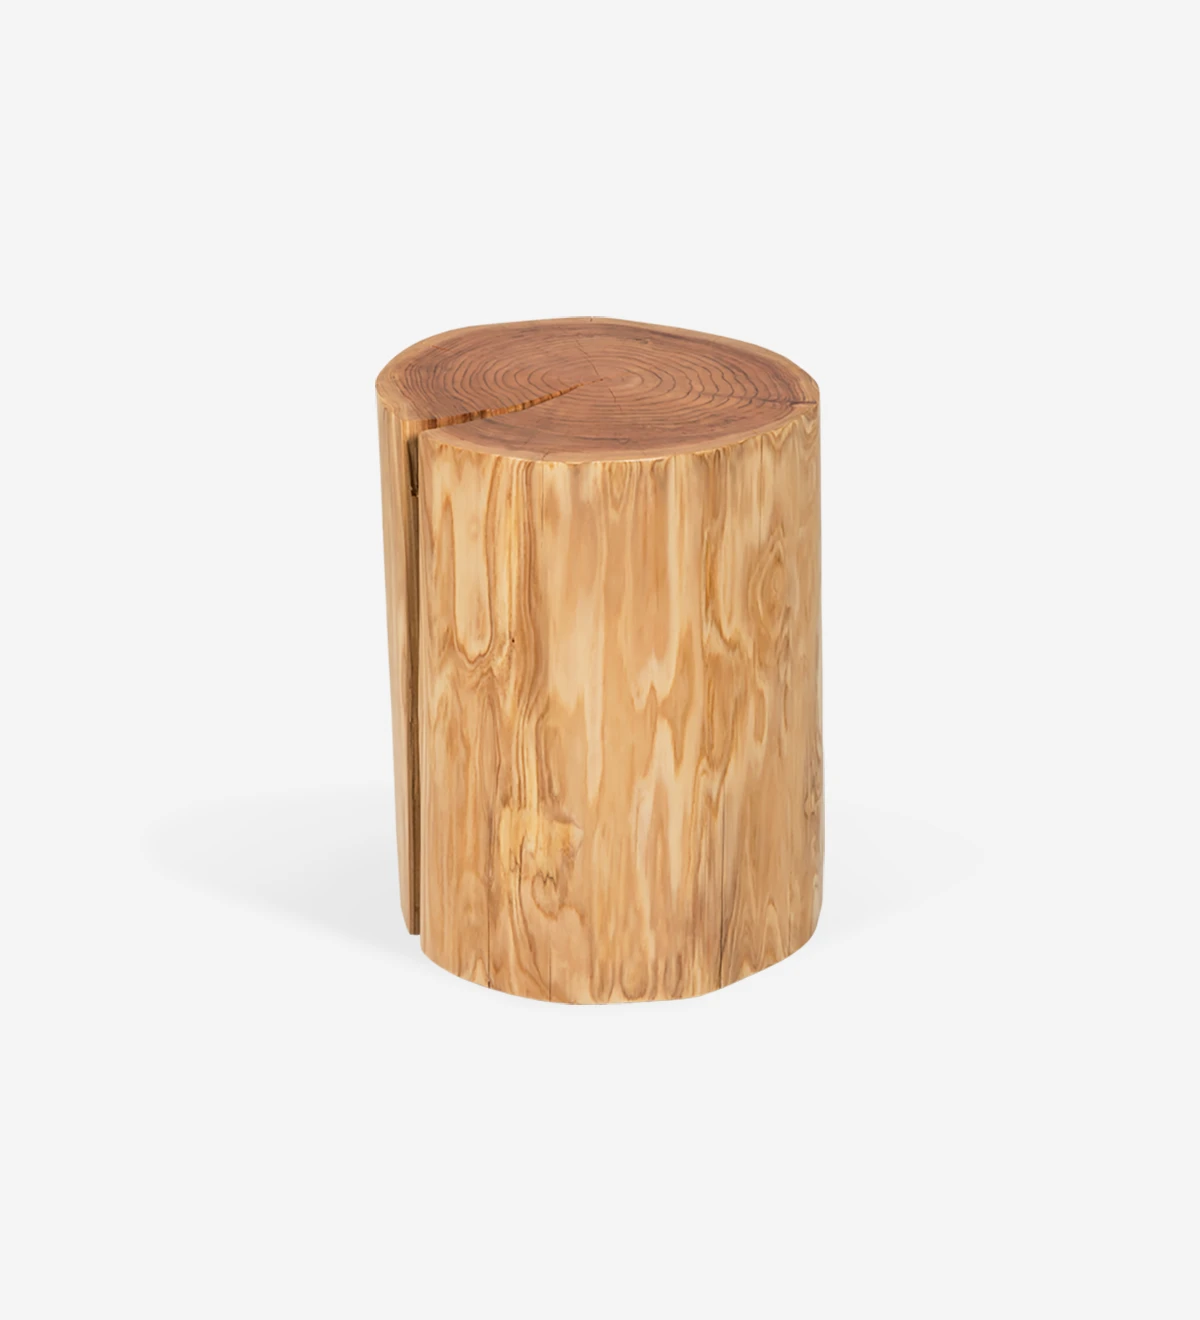 Trunk side table in natural cryptomeria wood.